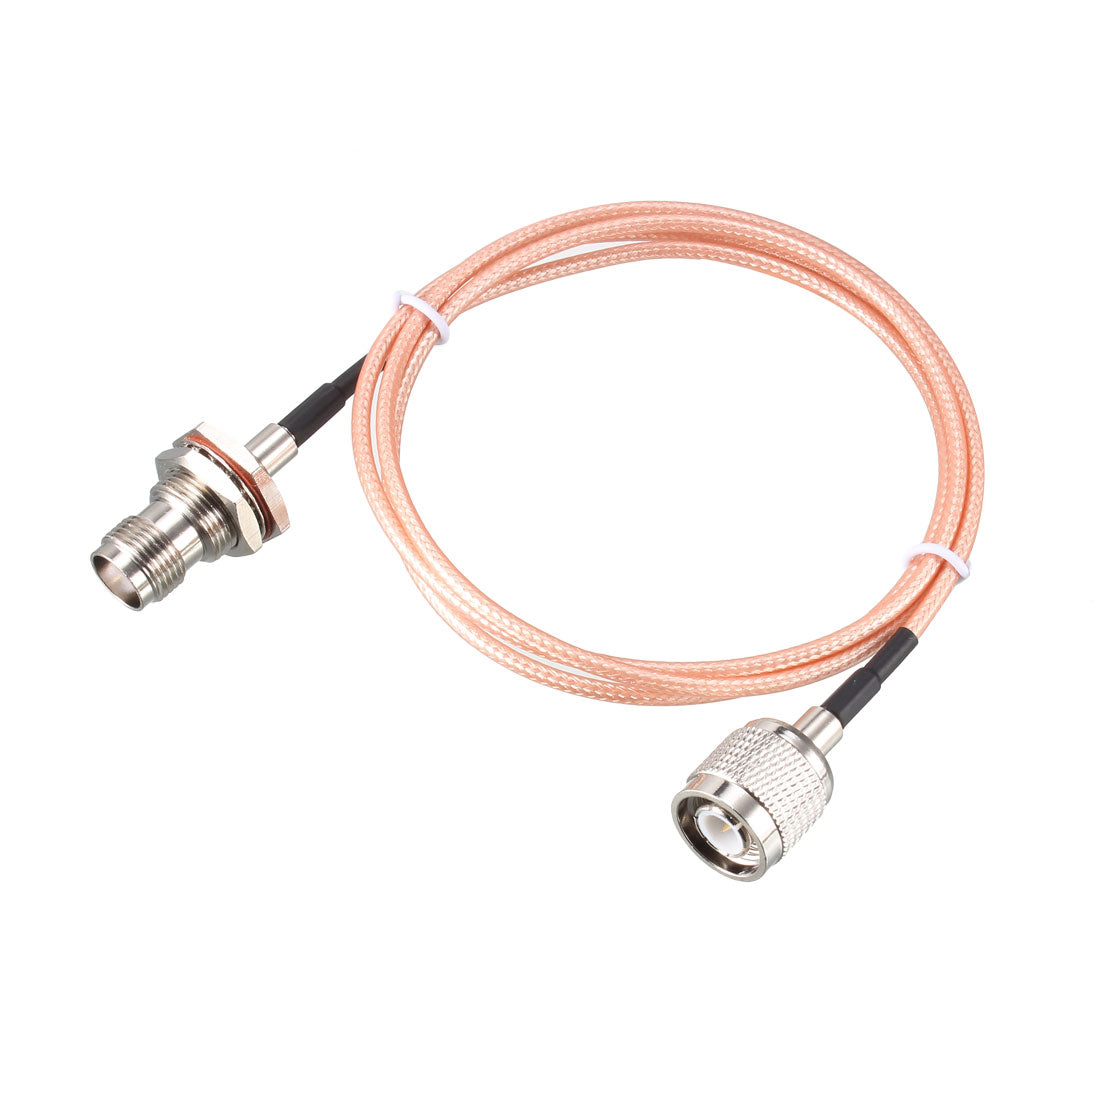 uxcell Uxcell RG316 RF Coaxial Cable TNC Male to TNC Female Bulkhead Pigtail Jumper Cable